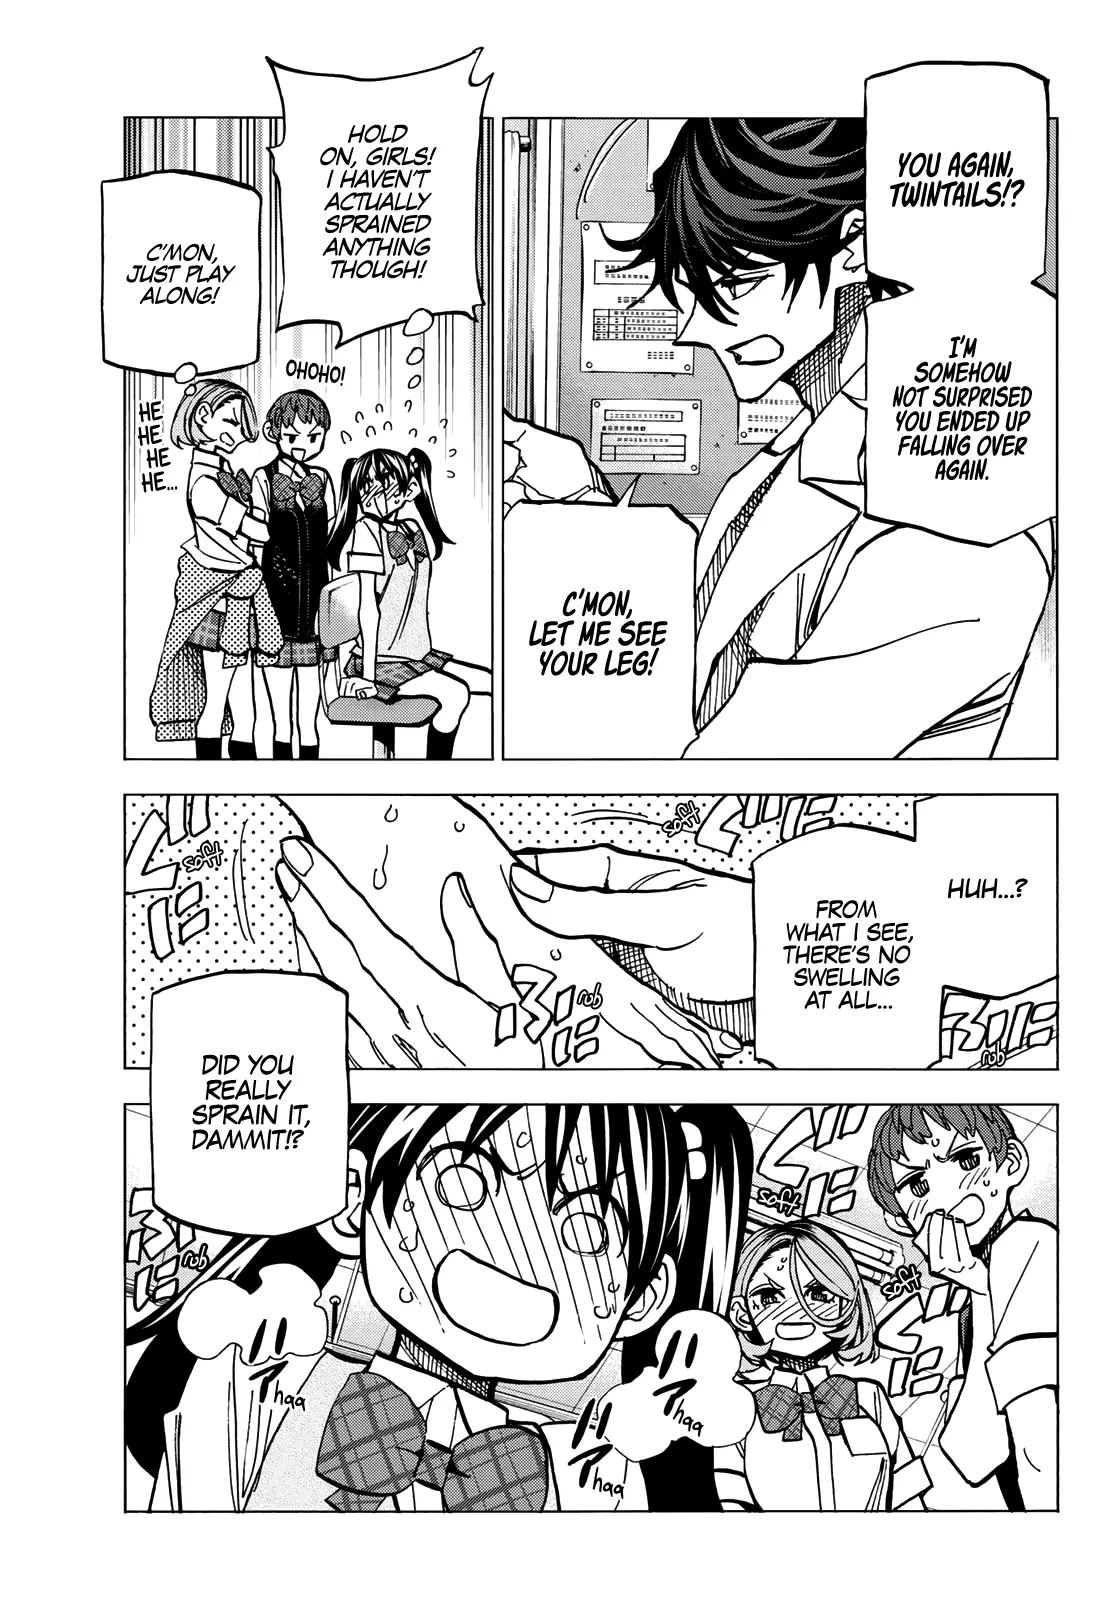 The Story Between A Dumb Prefect And A High School Girl With An Inappropriate Skirt Length - 10 page 6